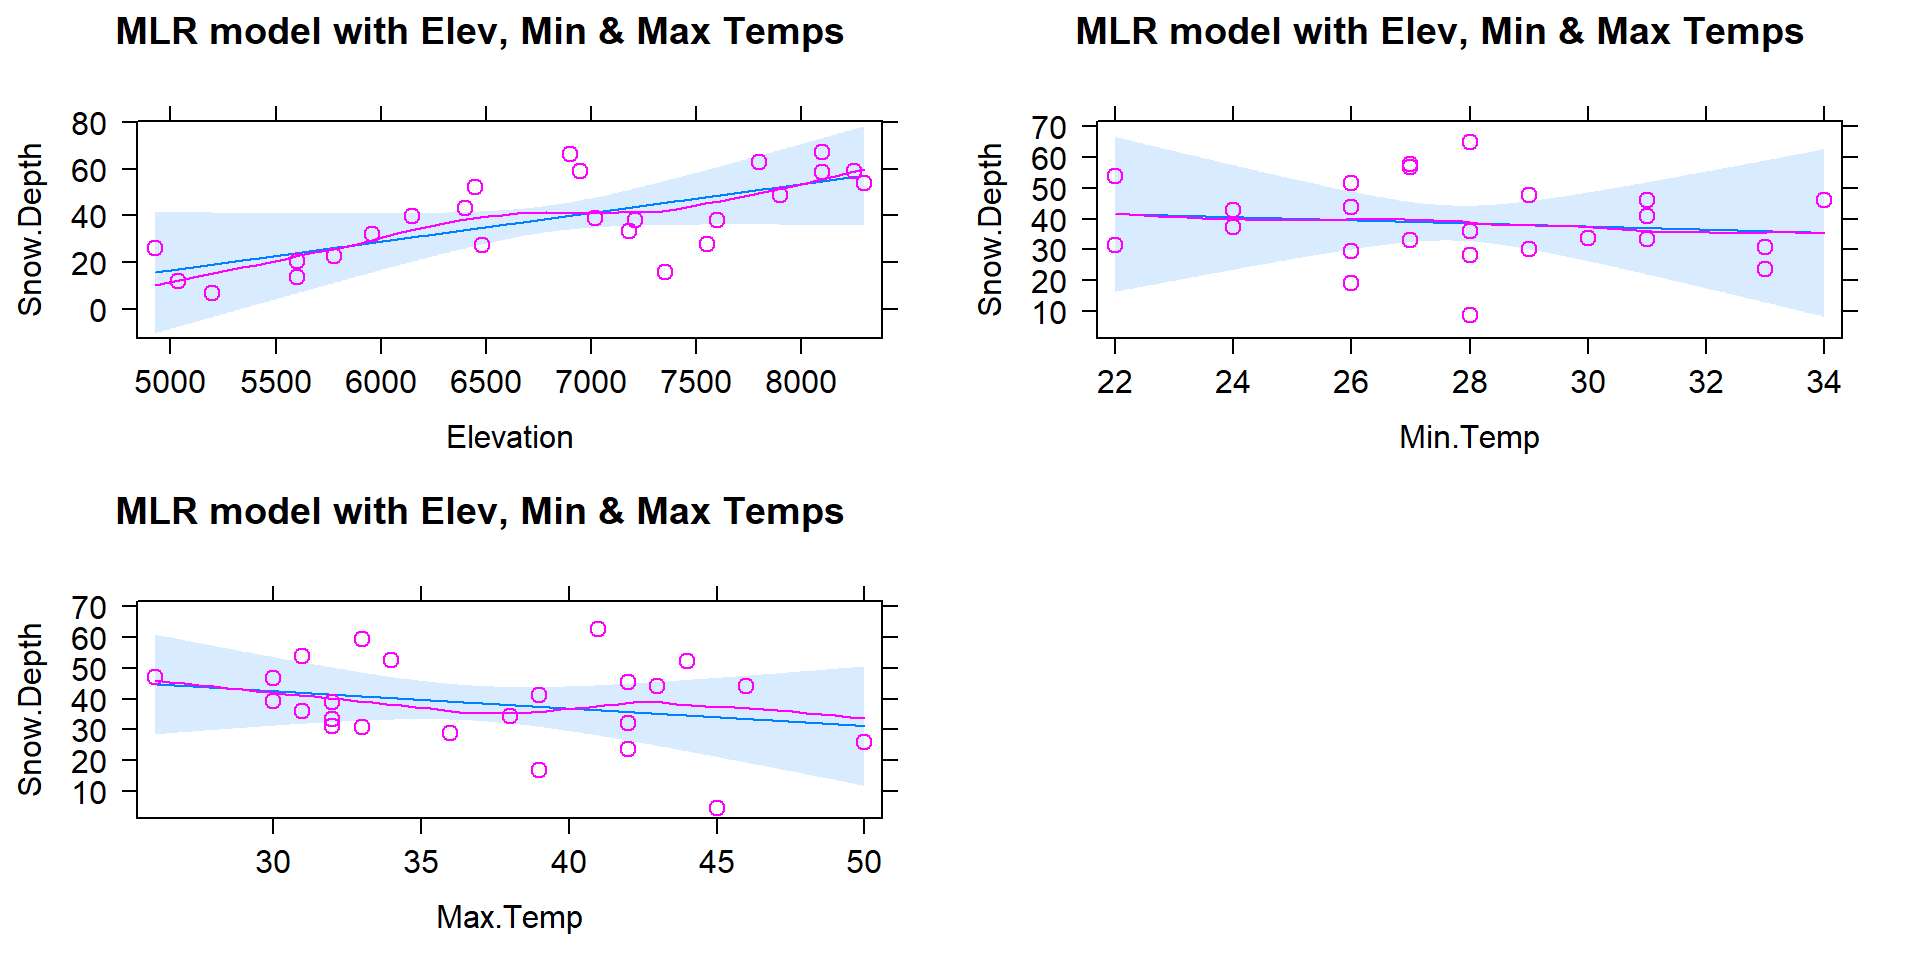 Term-plots for the MLR for Snow Depth based on Elevation, Min Temp and Max Temp. Compare this plot that comes from one MLR model to Figures 8.2, 8.3, and 8.4 for comparable SLR models. Note the points in these panels are the partial residuals that are generated after controlling for the other two of the three variables.